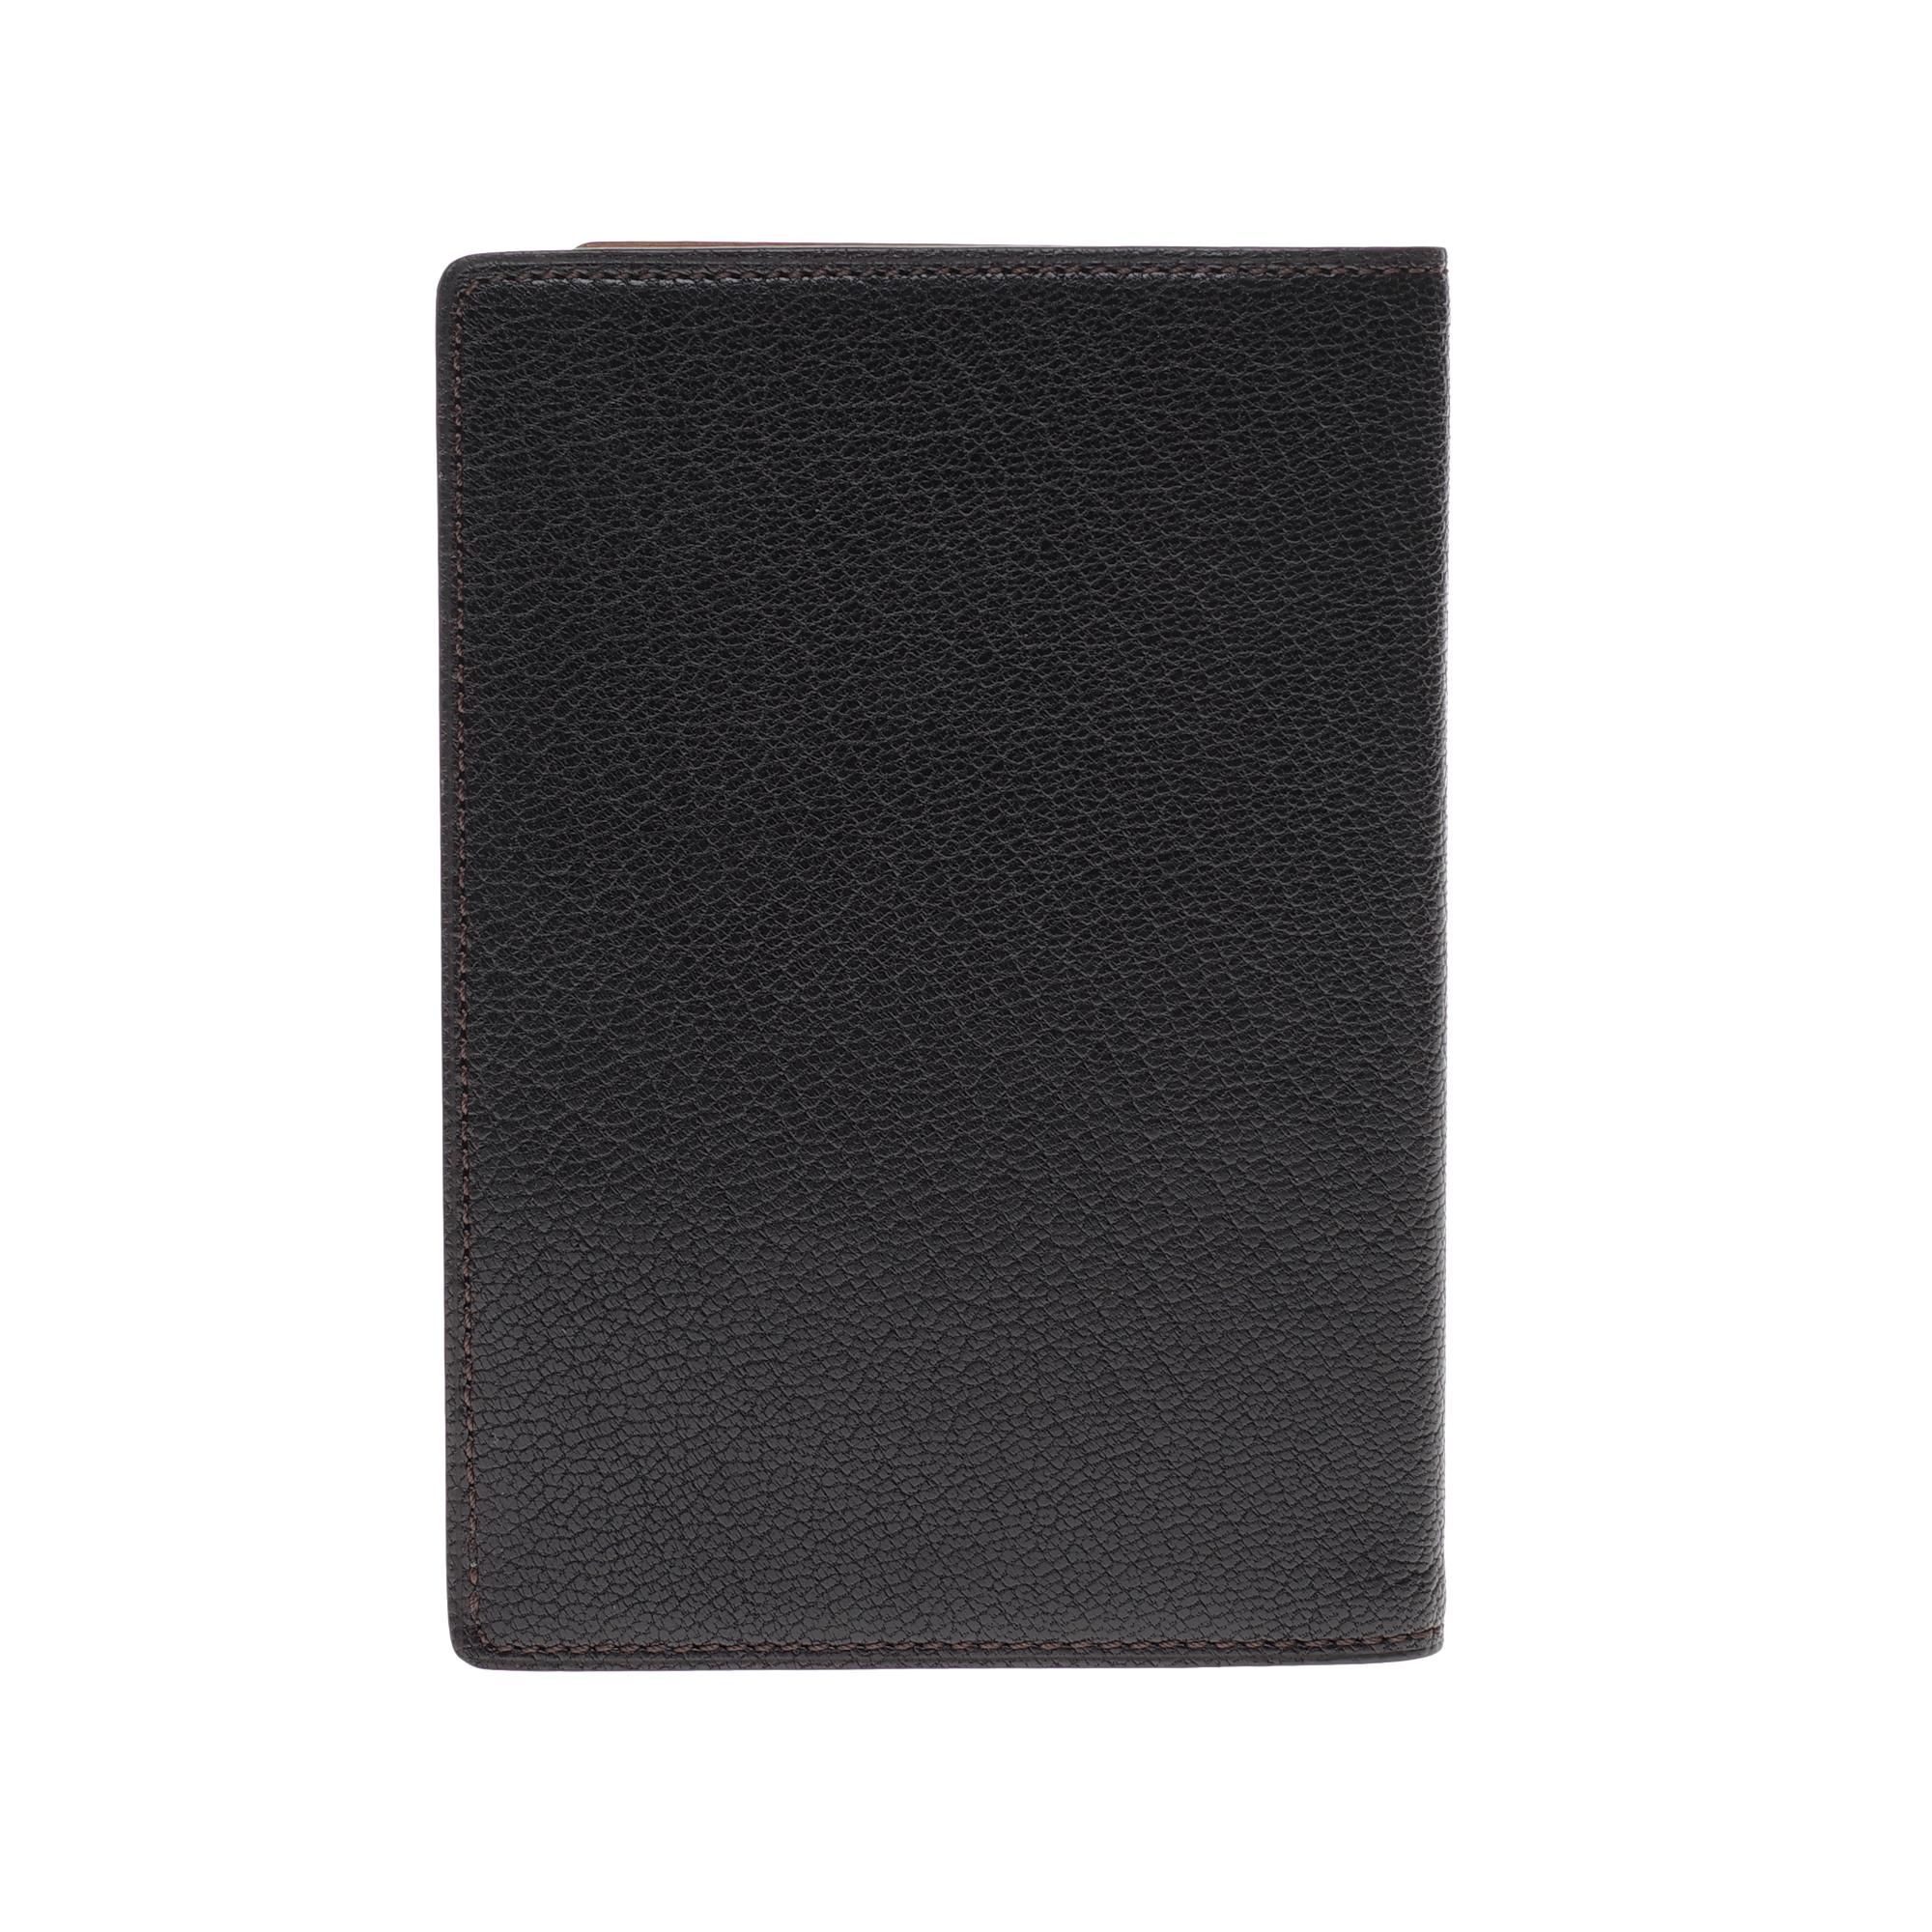 Passport holder/ Card holder in black goat leather.
Gold interior, 5 card compartments.
Signature: 